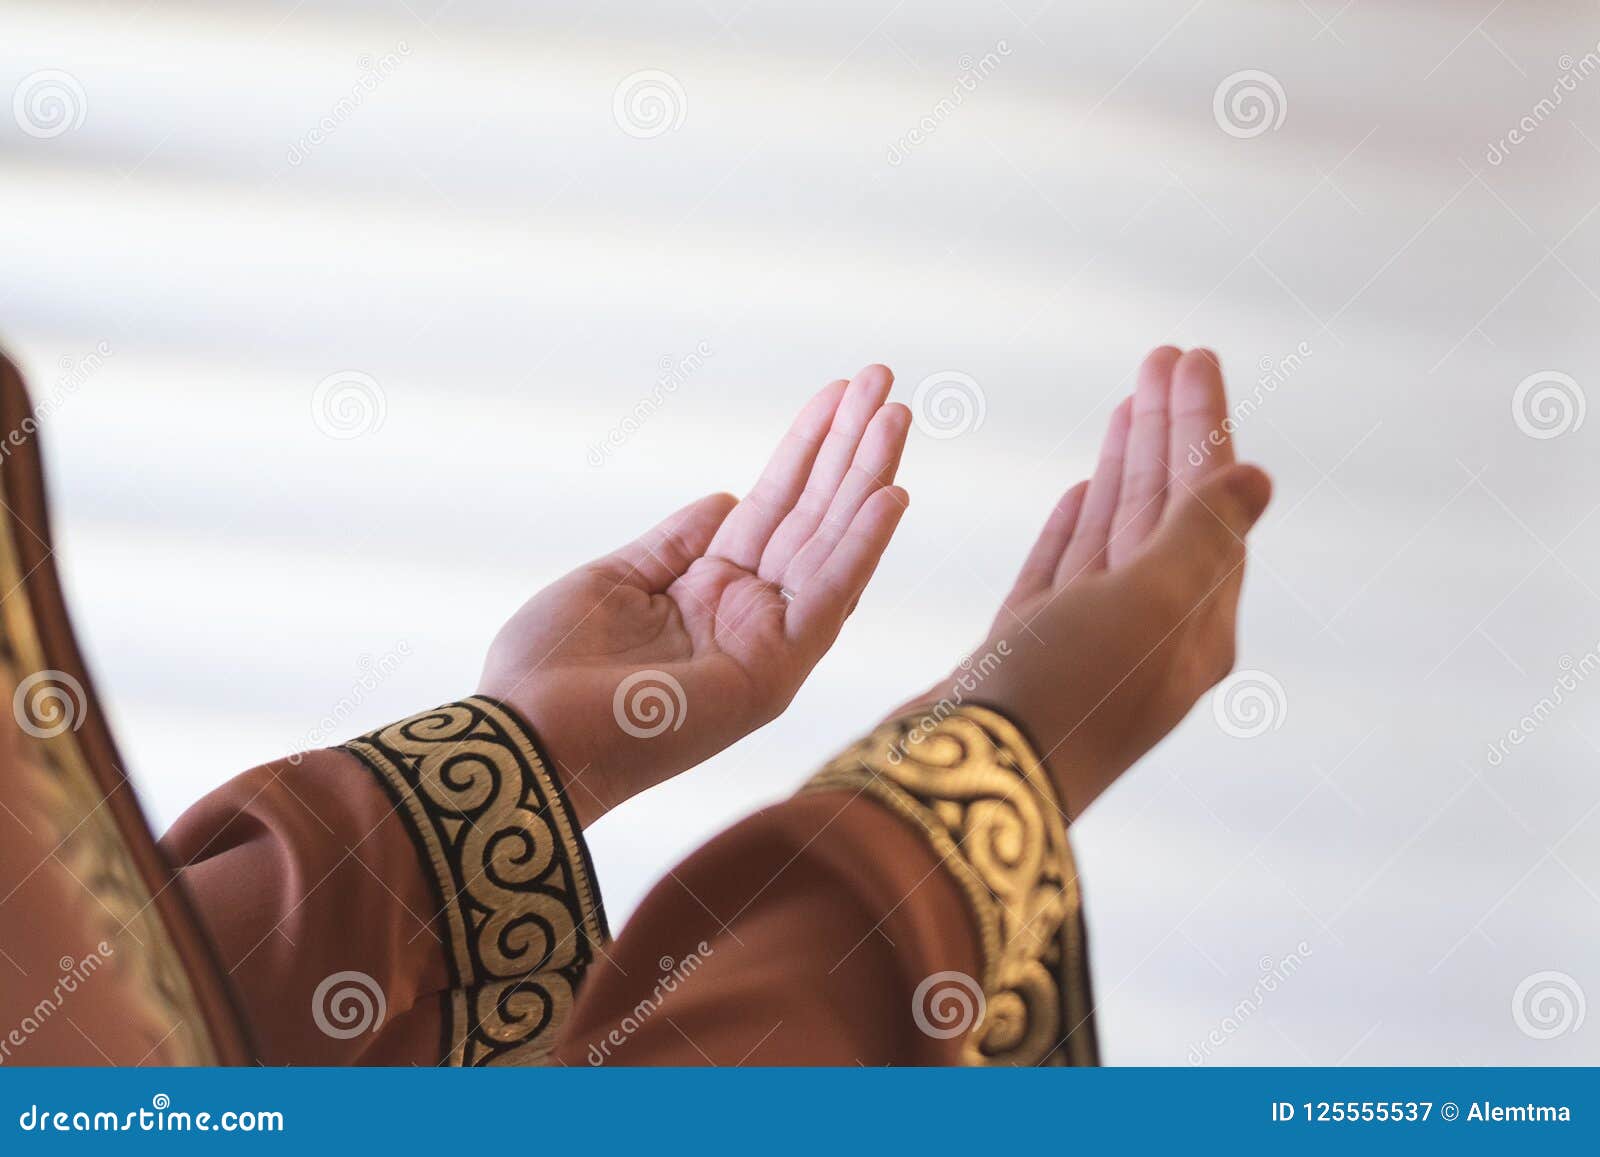 Hands of Muslim People Praying with Mosque Interior Background ...